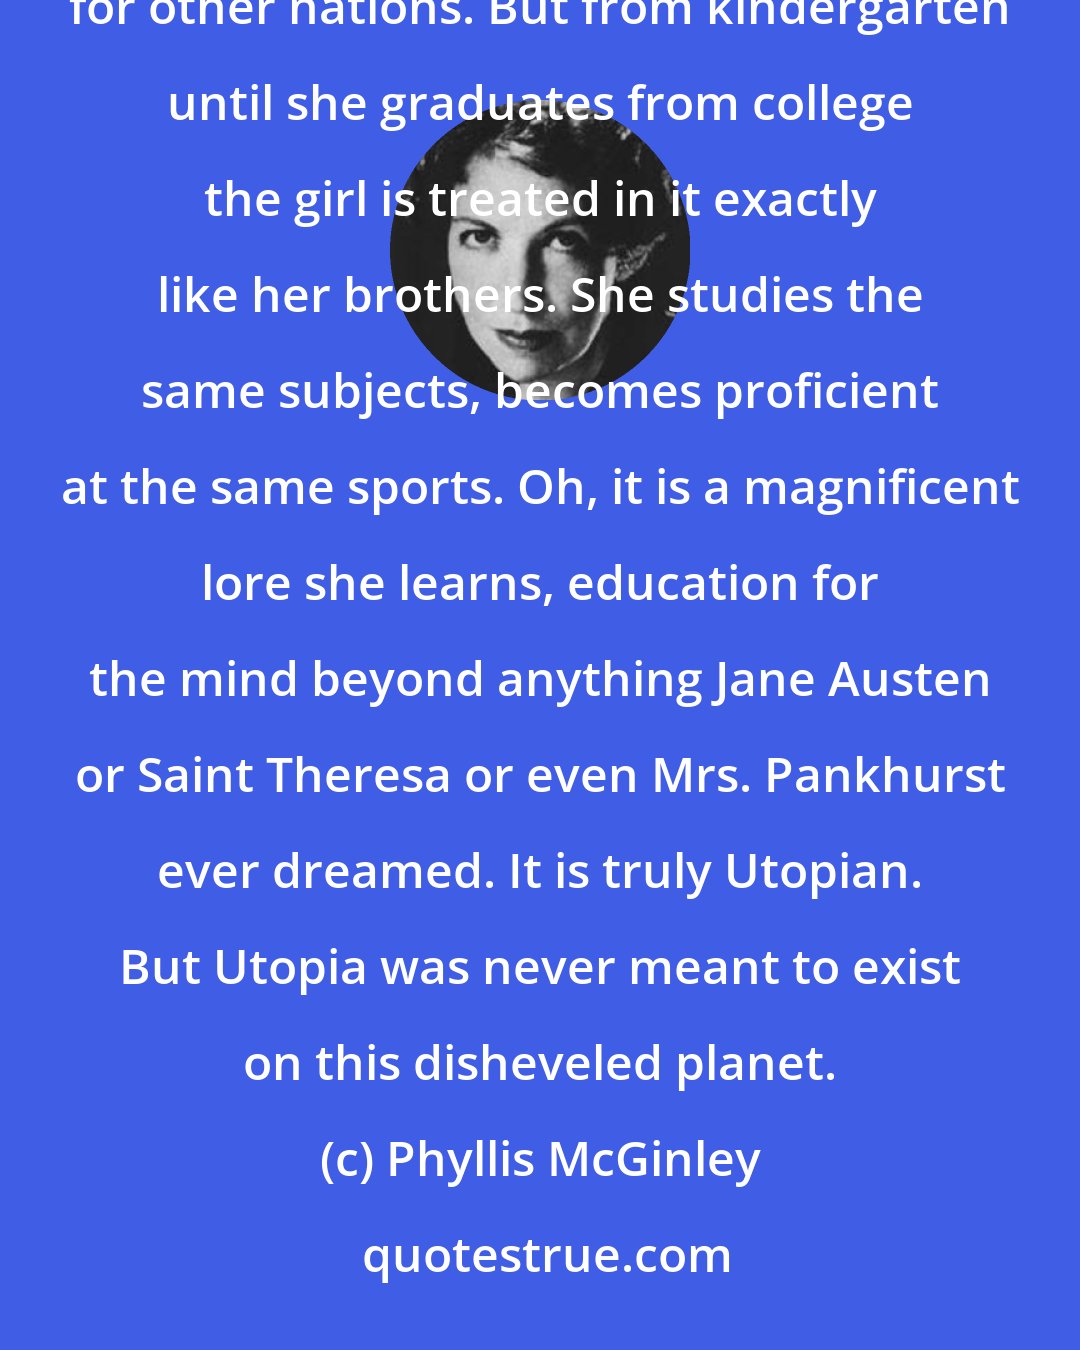 Phyllis McGinley: The system - the American one, at least - is a vast and noble experiment. It has been polestar and exemplar for other nations. But from kindergarten until she graduates from college the girl is treated in it exactly like her brothers. She studies the same subjects, becomes proficient at the same sports. Oh, it is a magnificent lore she learns, education for the mind beyond anything Jane Austen or Saint Theresa or even Mrs. Pankhurst ever dreamed. It is truly Utopian. But Utopia was never meant to exist on this disheveled planet.